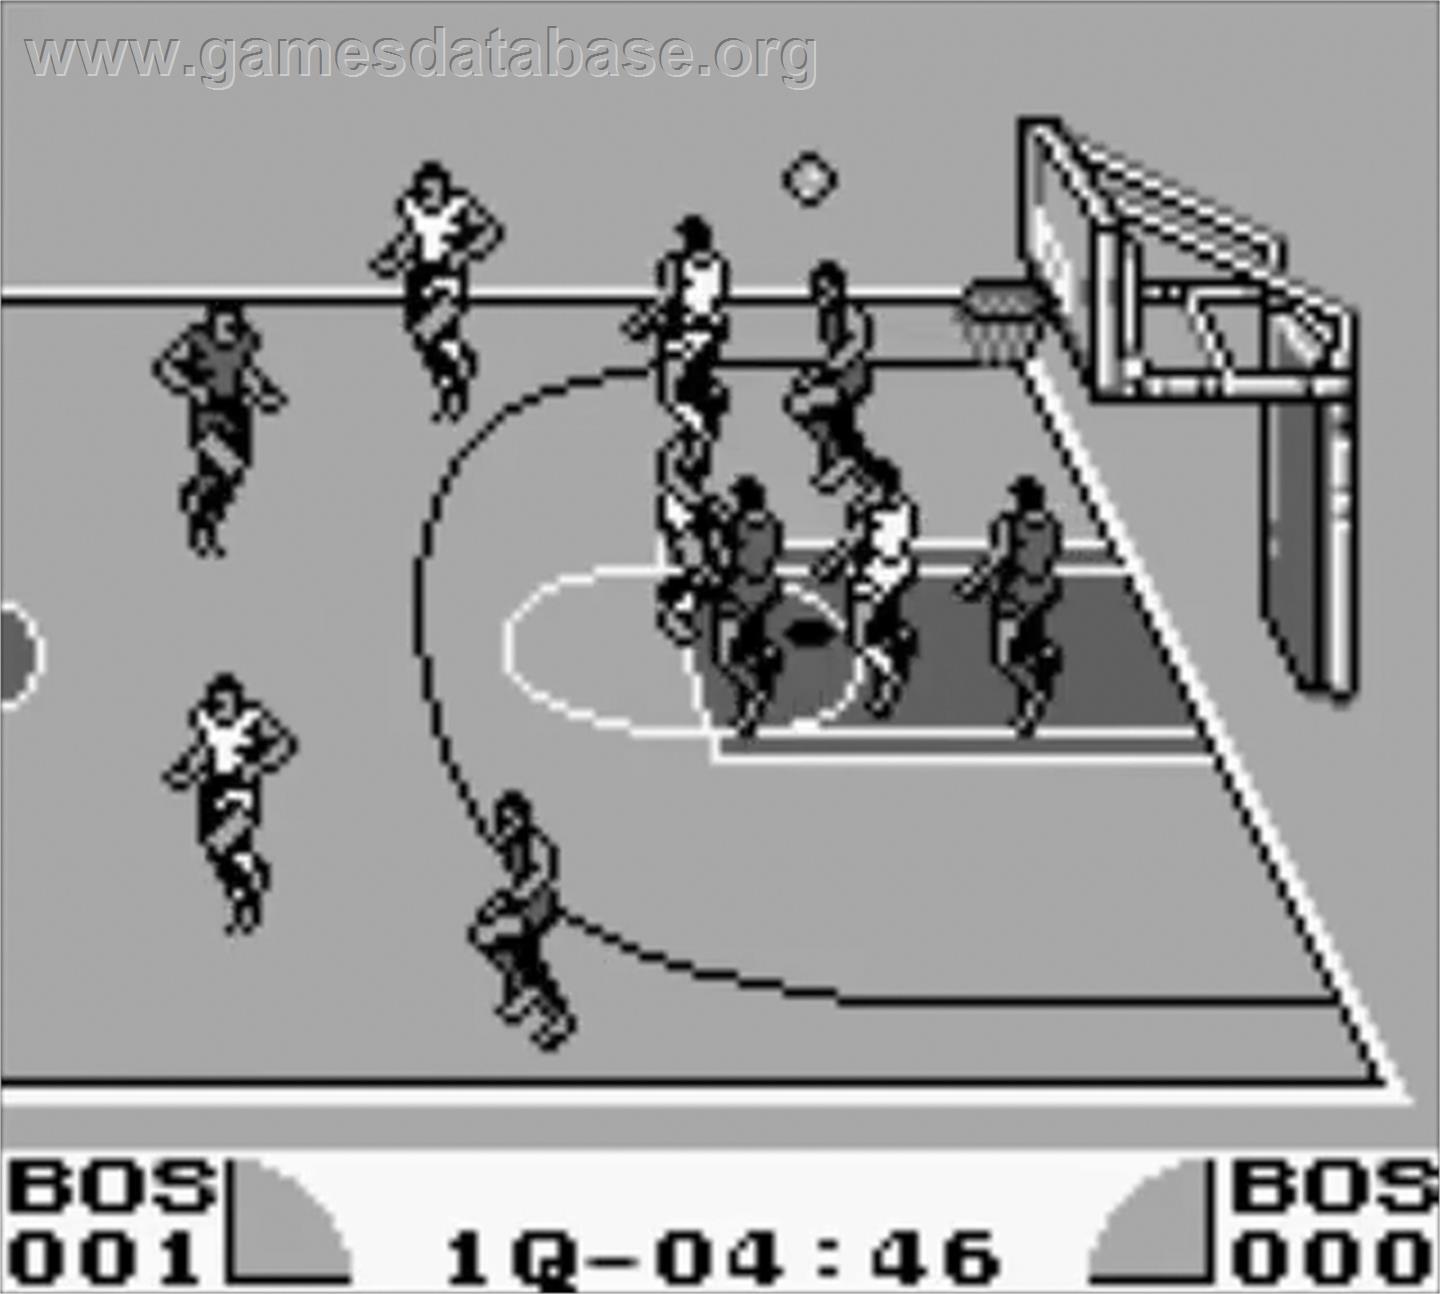 Double Dribble: 5 on 5 - Nintendo Game Boy - Artwork - In Game